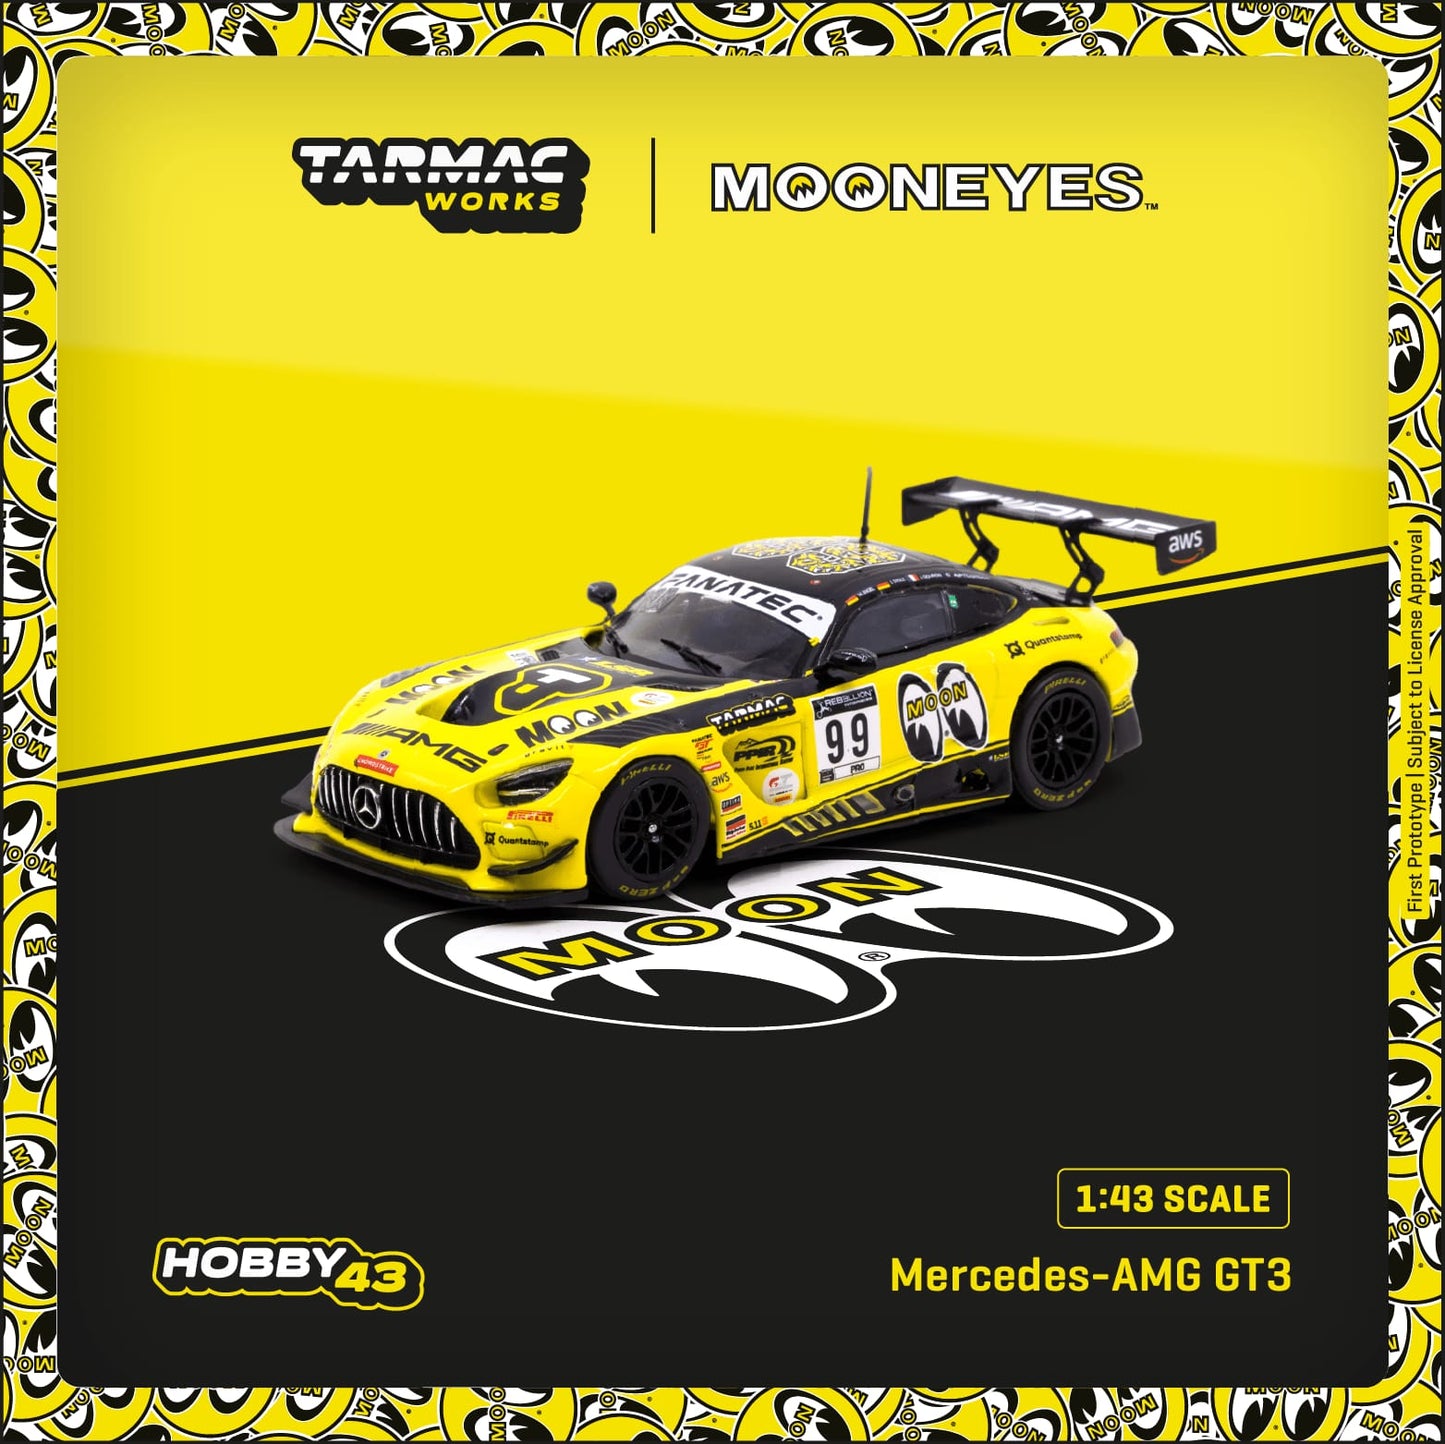 Tarmac Works 1/43 Scale Mercedes-AMG GT3 Indianapolis 8 Hour 2021 Craft-Bamboo Racing M. Engel / L. Stolz / J. Gounon